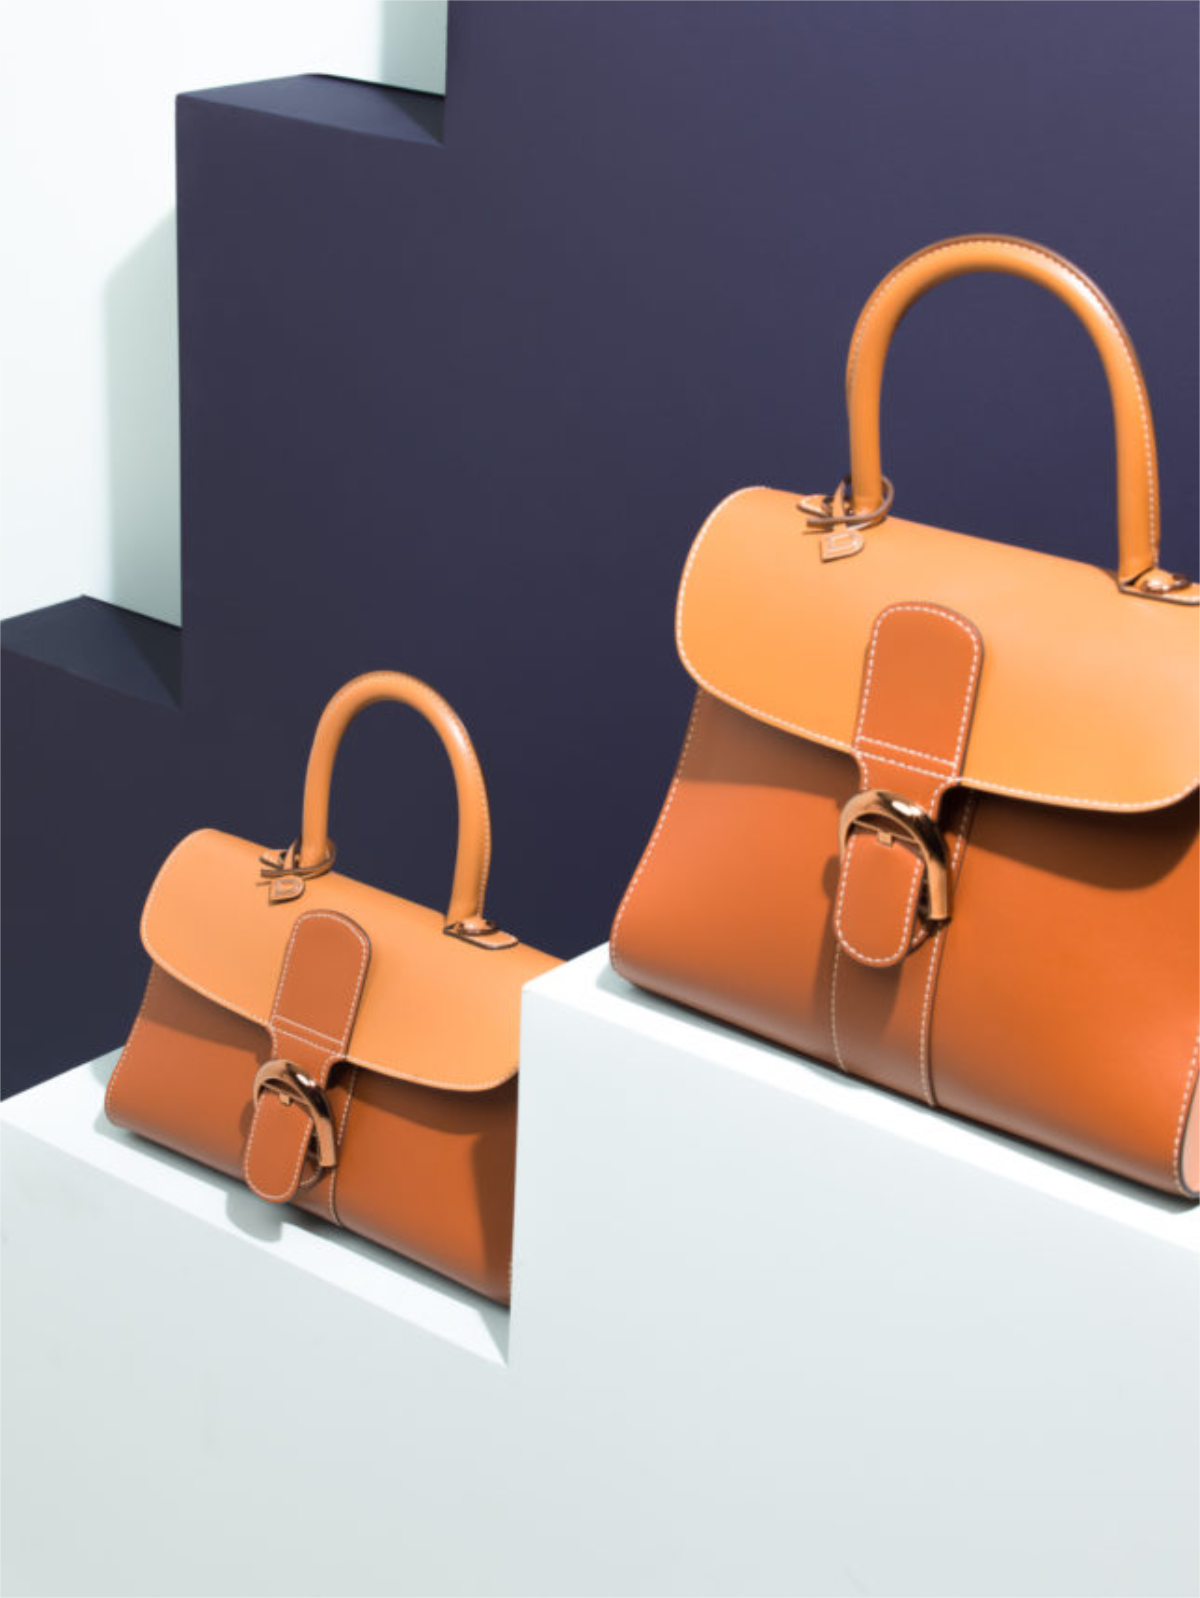 The House of DELVAUX